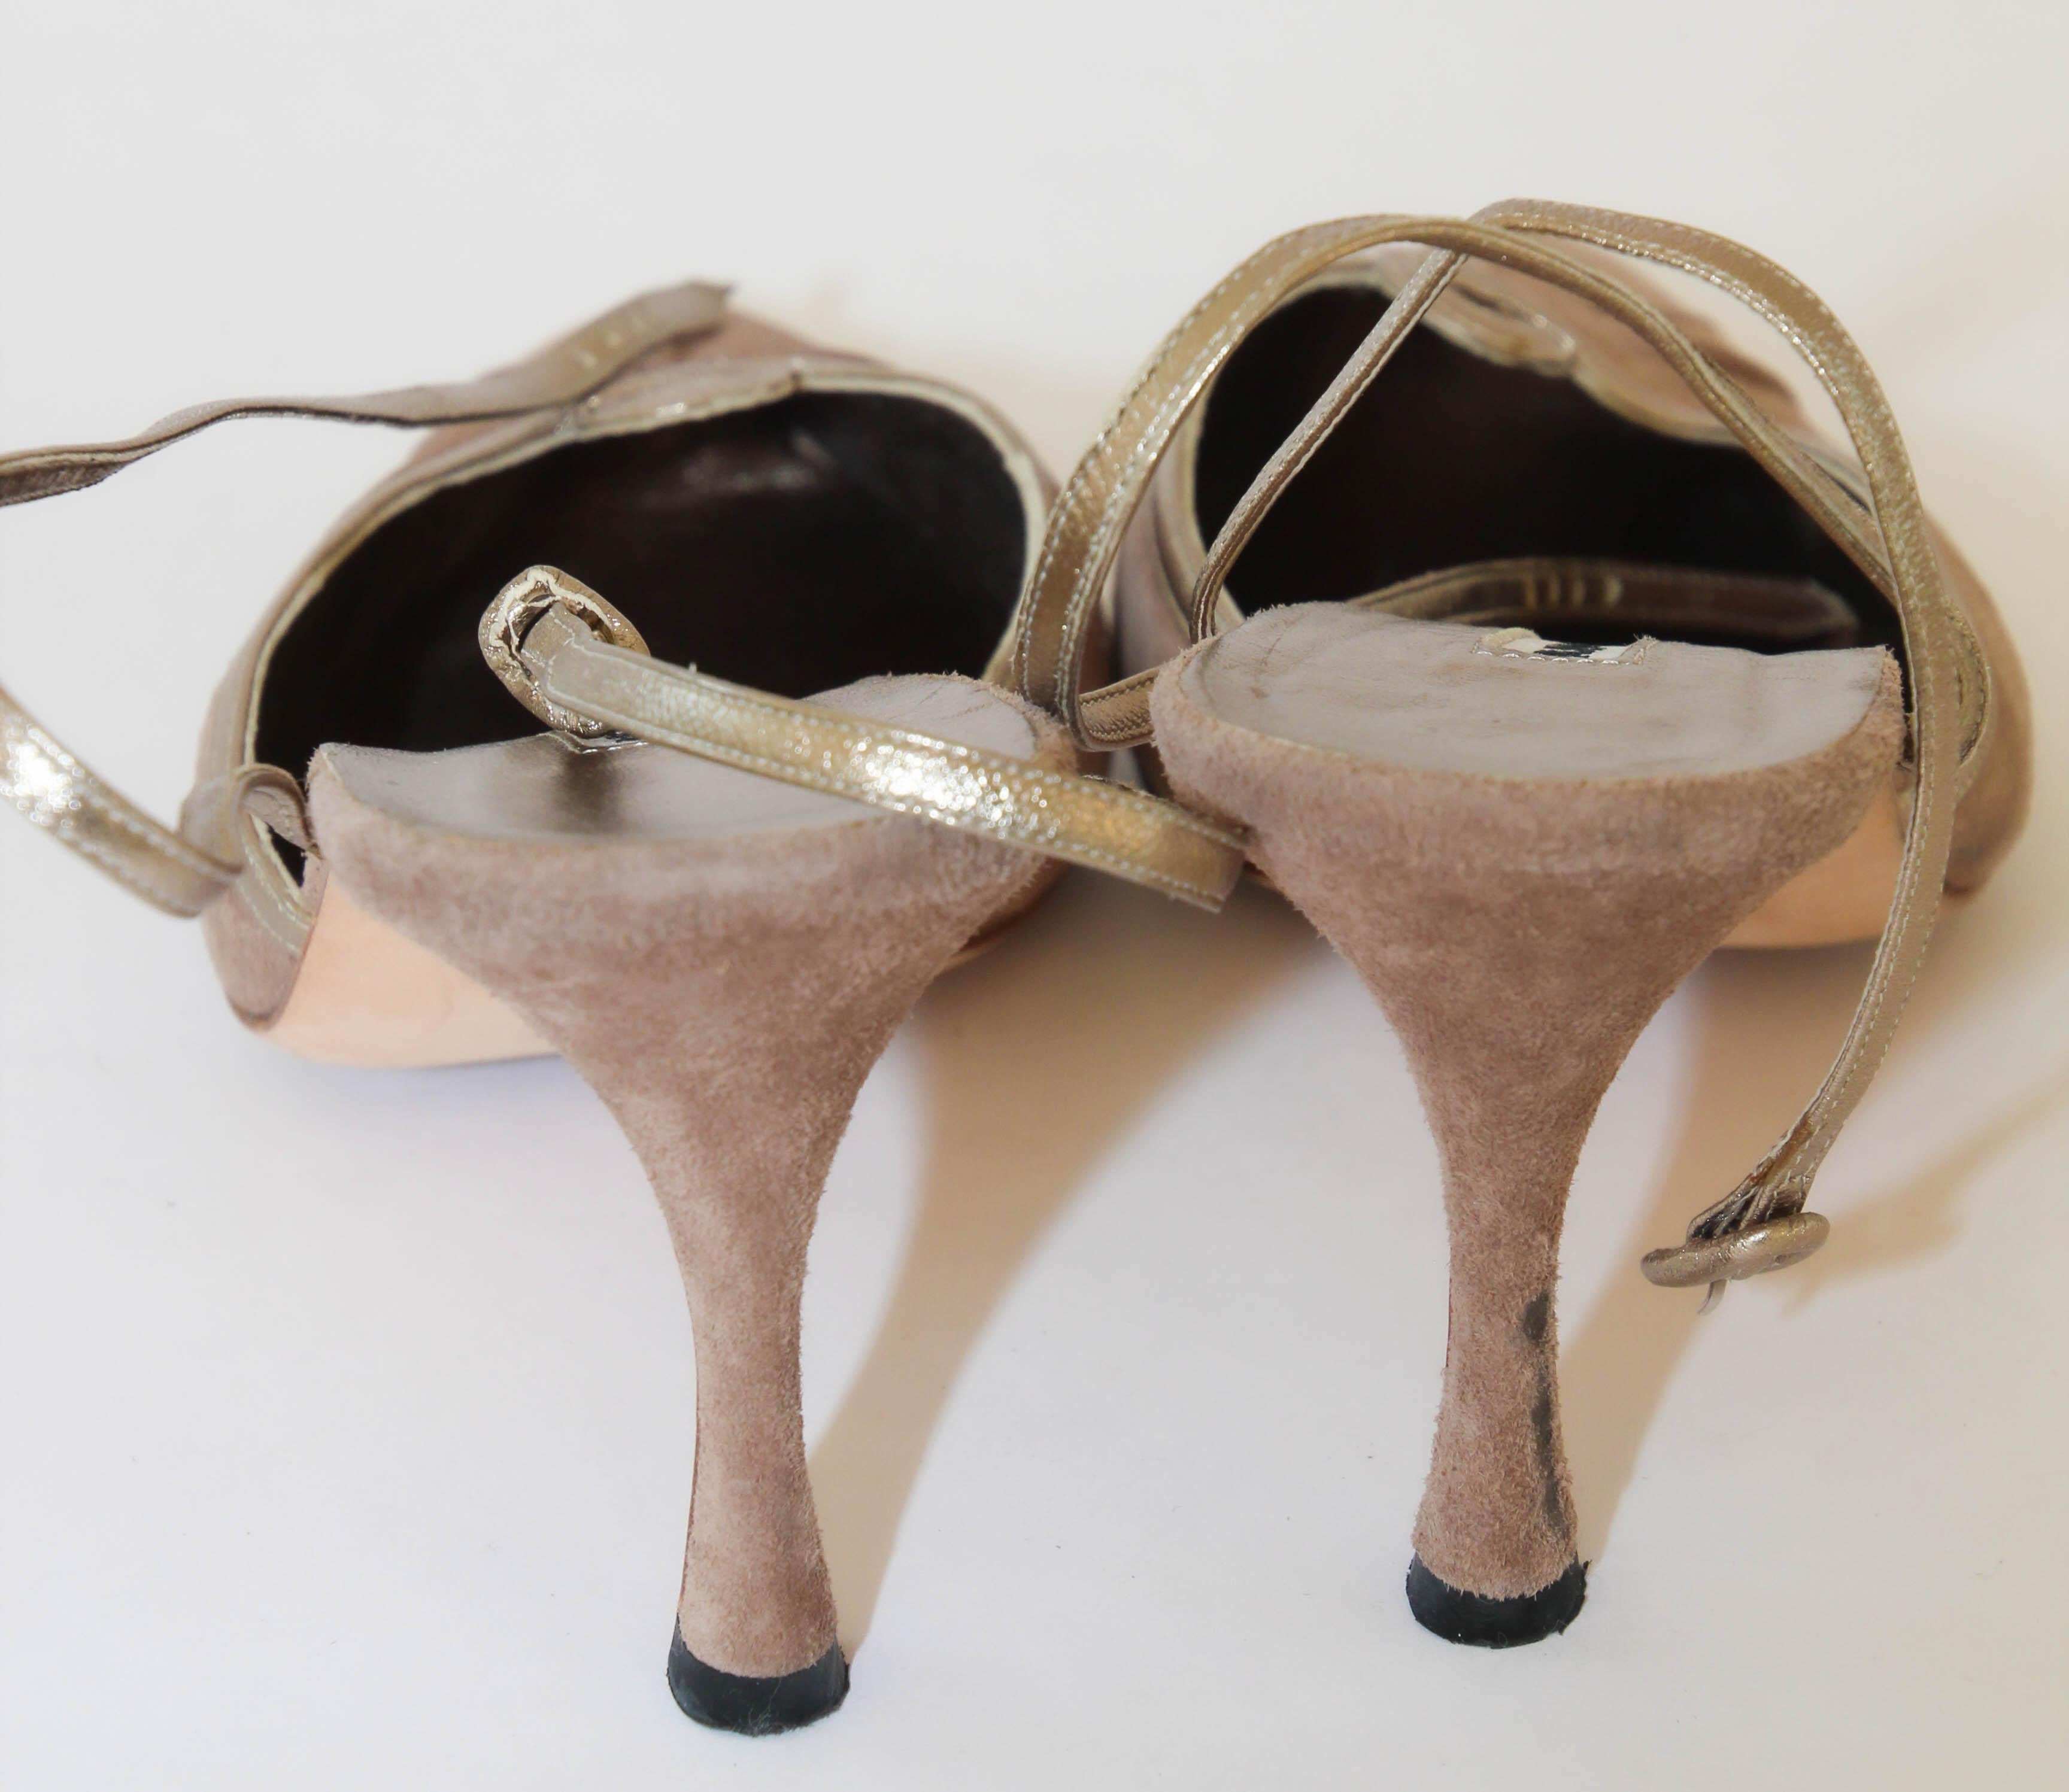 Manolo Blahnik Vintage Suede Shoes With Leather Ankle Straps Size 40 For Sale 6